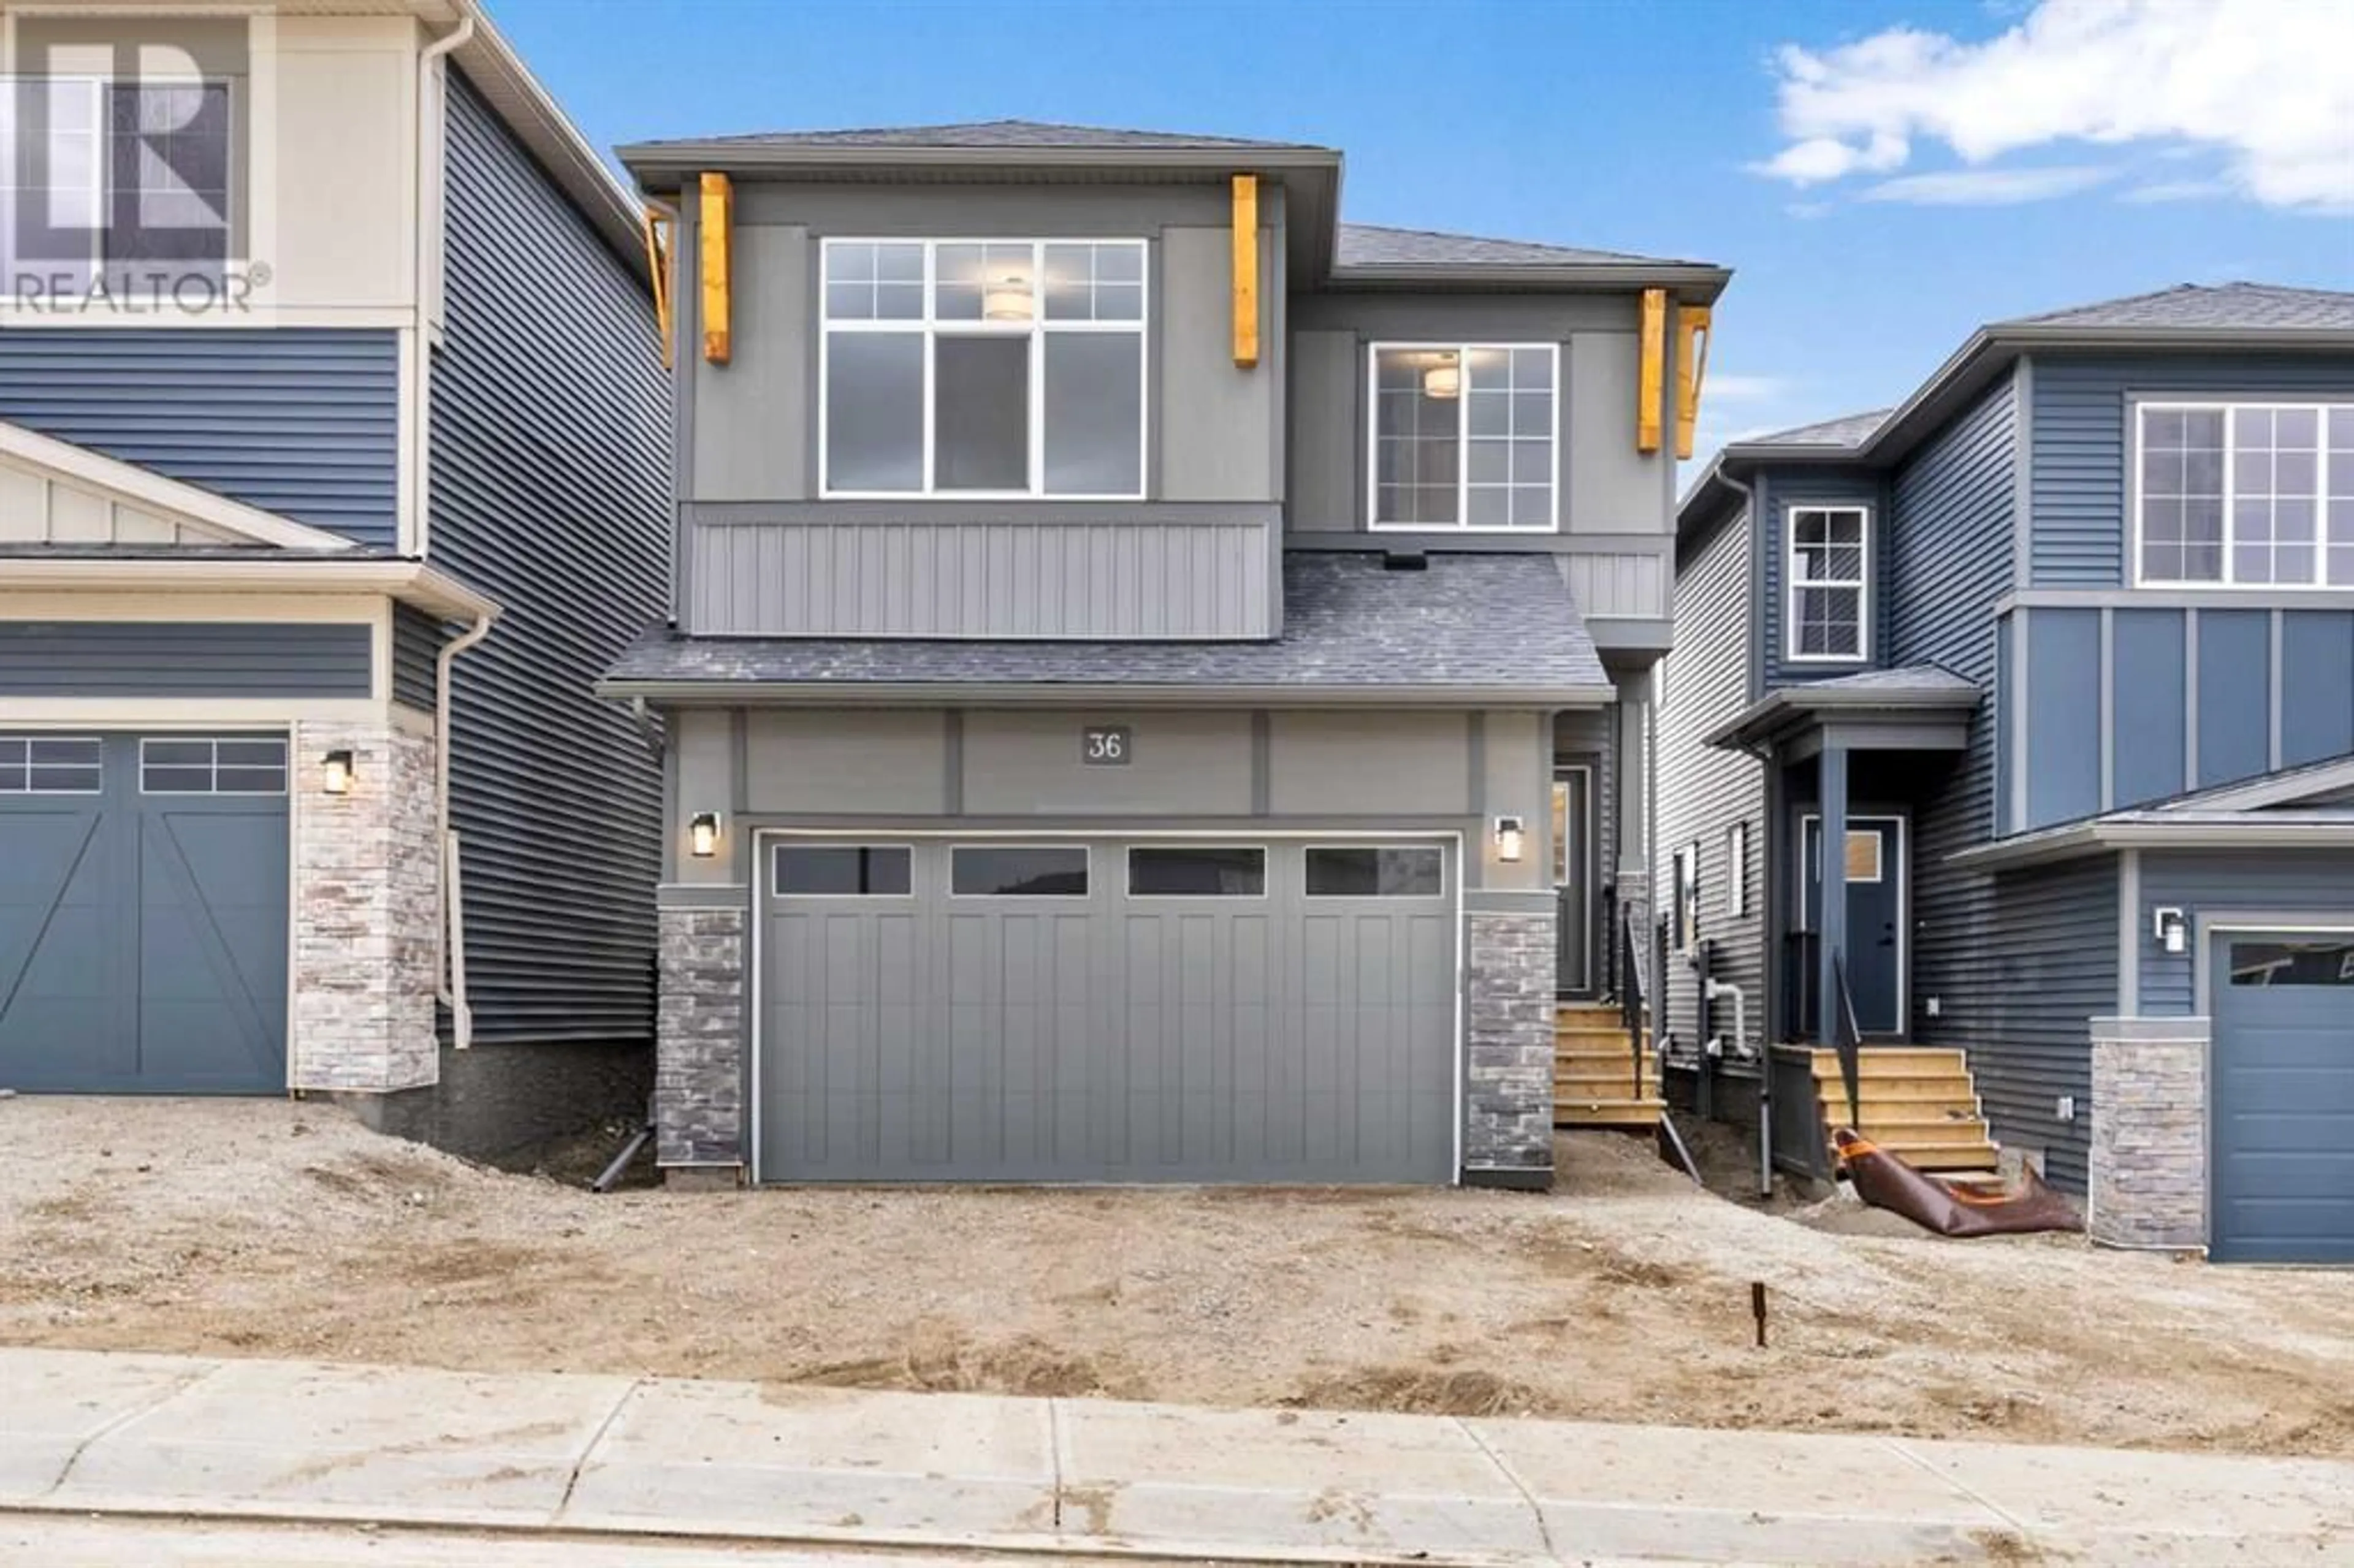 Frontside or backside of a home for 36 Carringvue Passage NW, Calgary Alberta T3P2G5